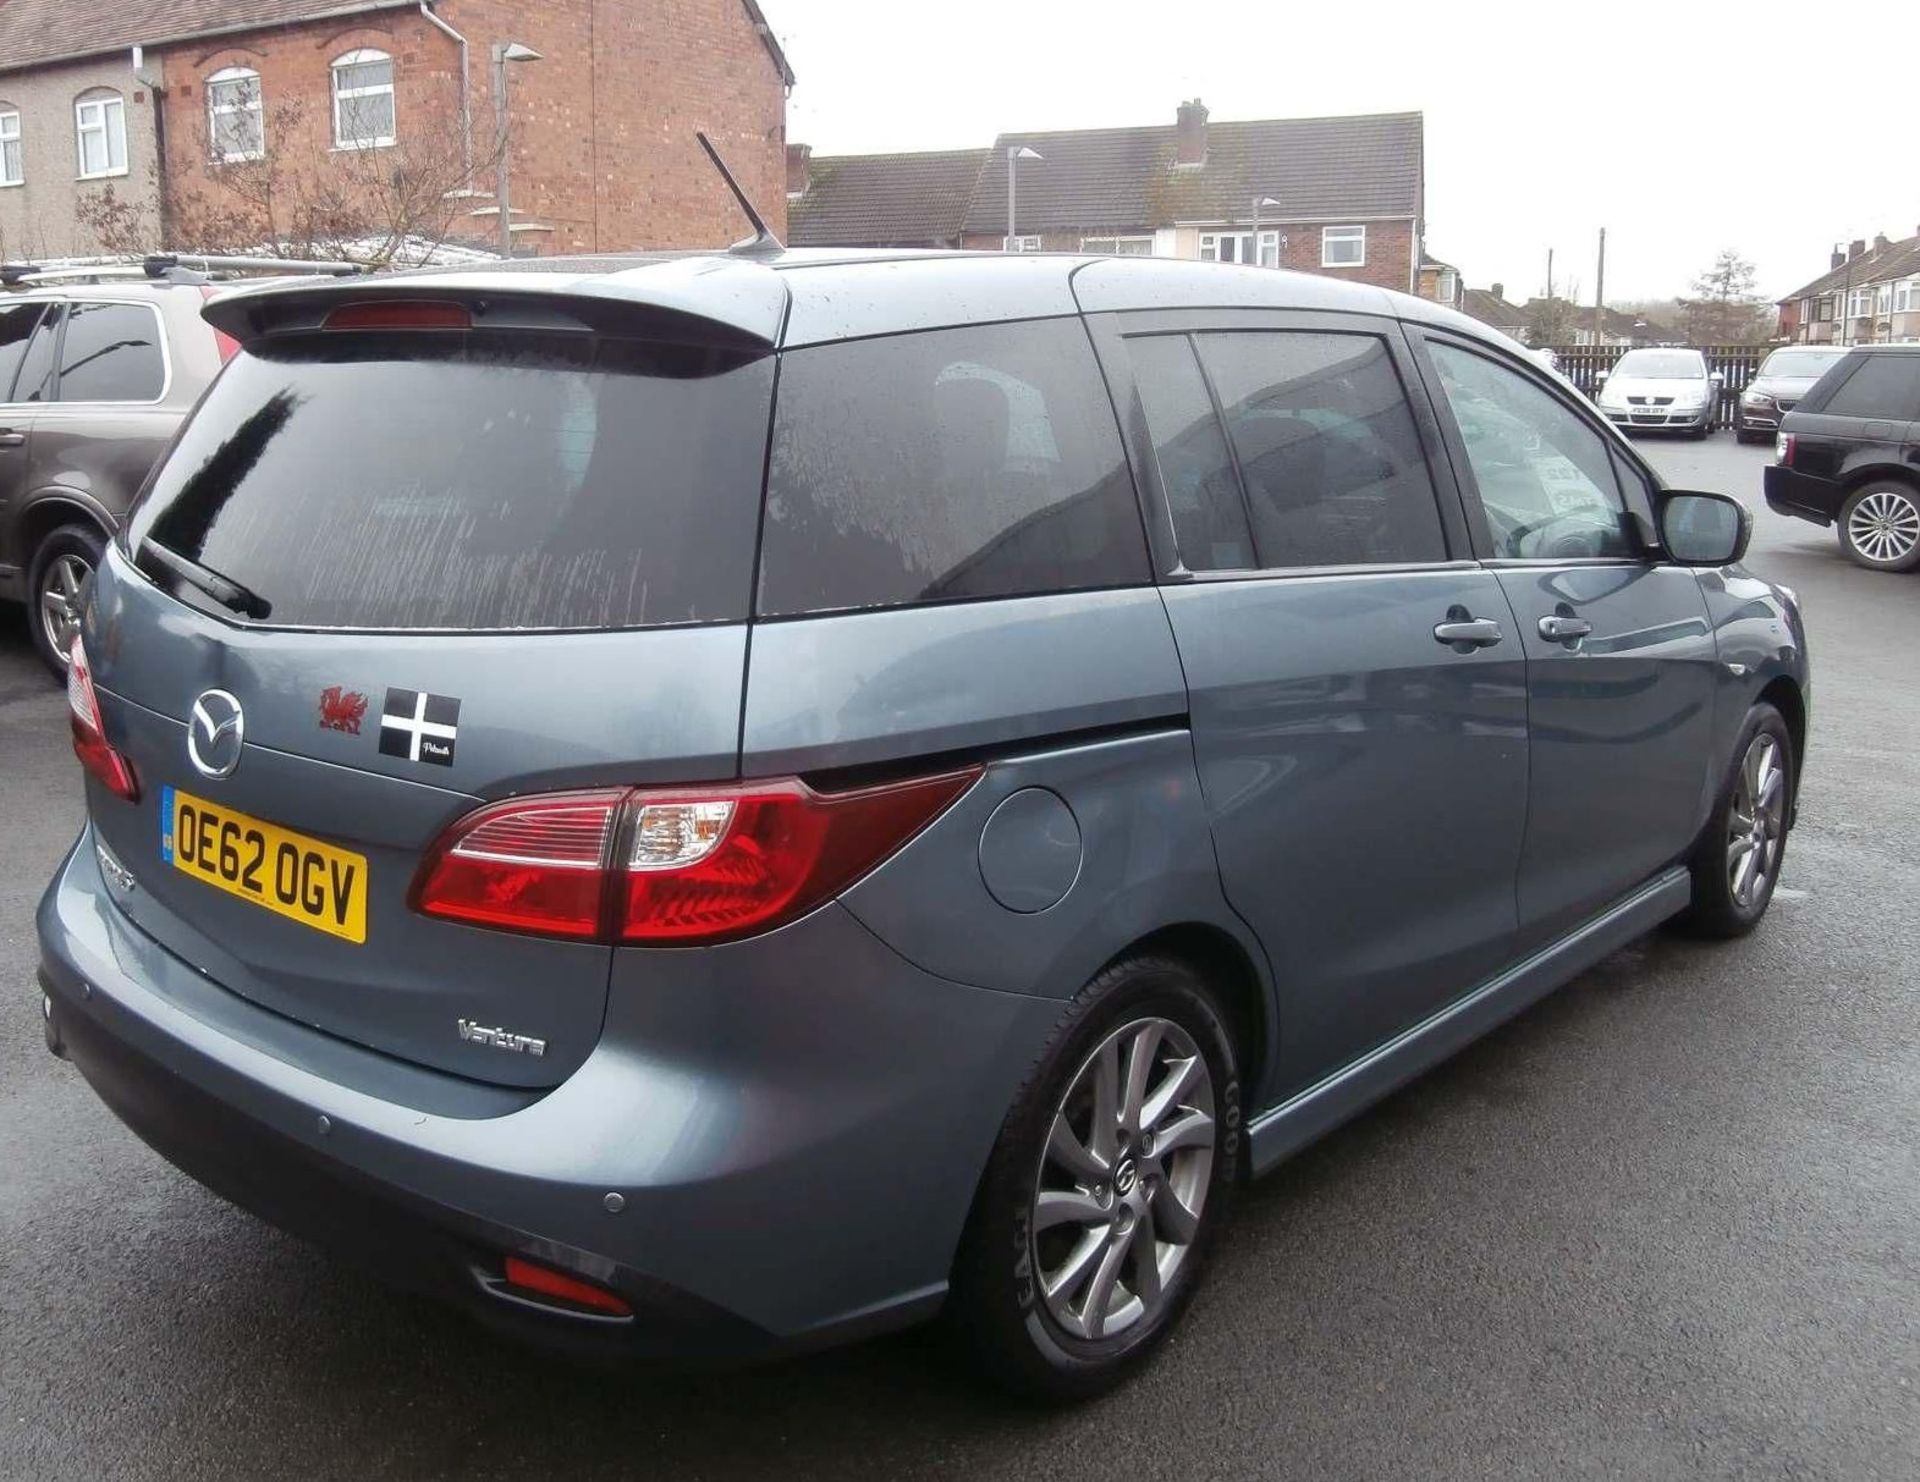 2013 Mazda 5 2.0 Venture Edition 5 Dr MPV - CL505 - NO VAT ON THE HAMMER - Location: Corby, N - Image 2 of 9